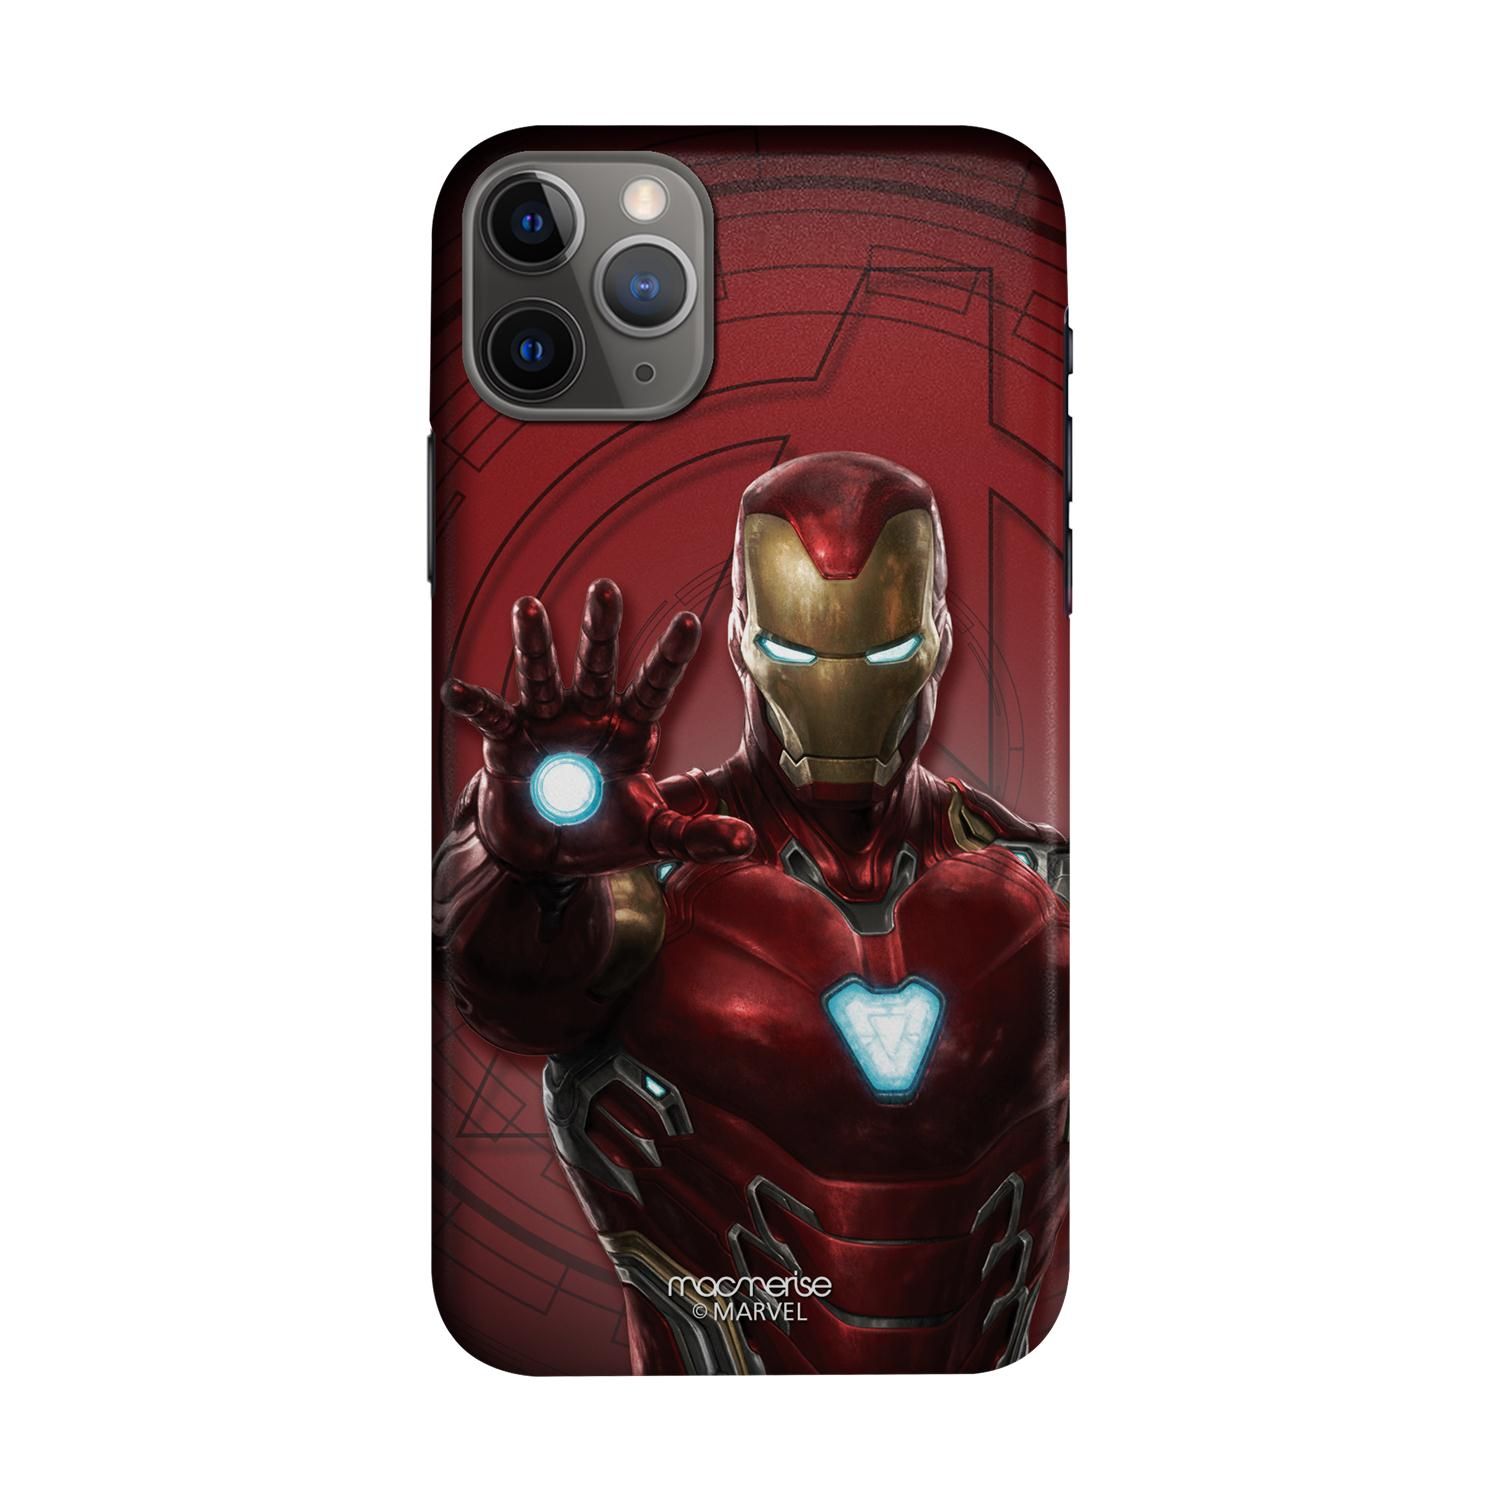 Buy Iron man Mark L Armor - Sleek Phone Case for iPhone 11 Pro Max Online